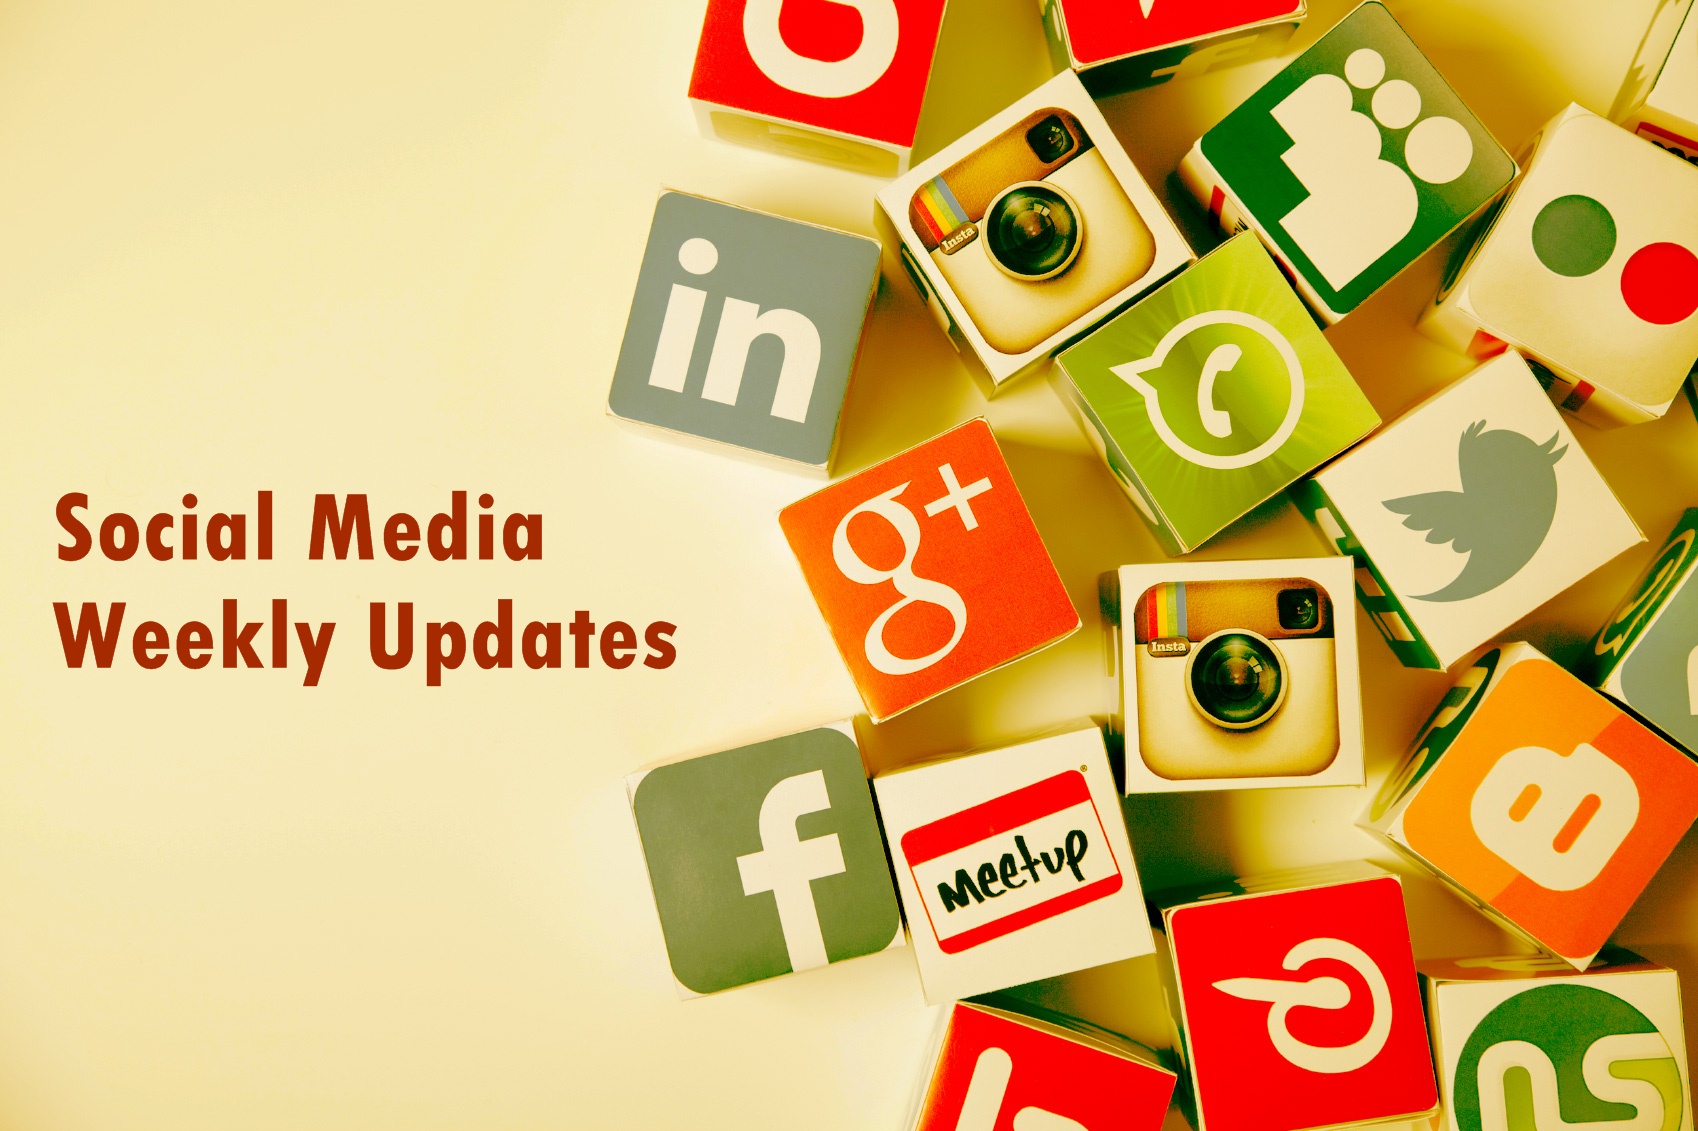 Social Media World: A Weekly Round-Up